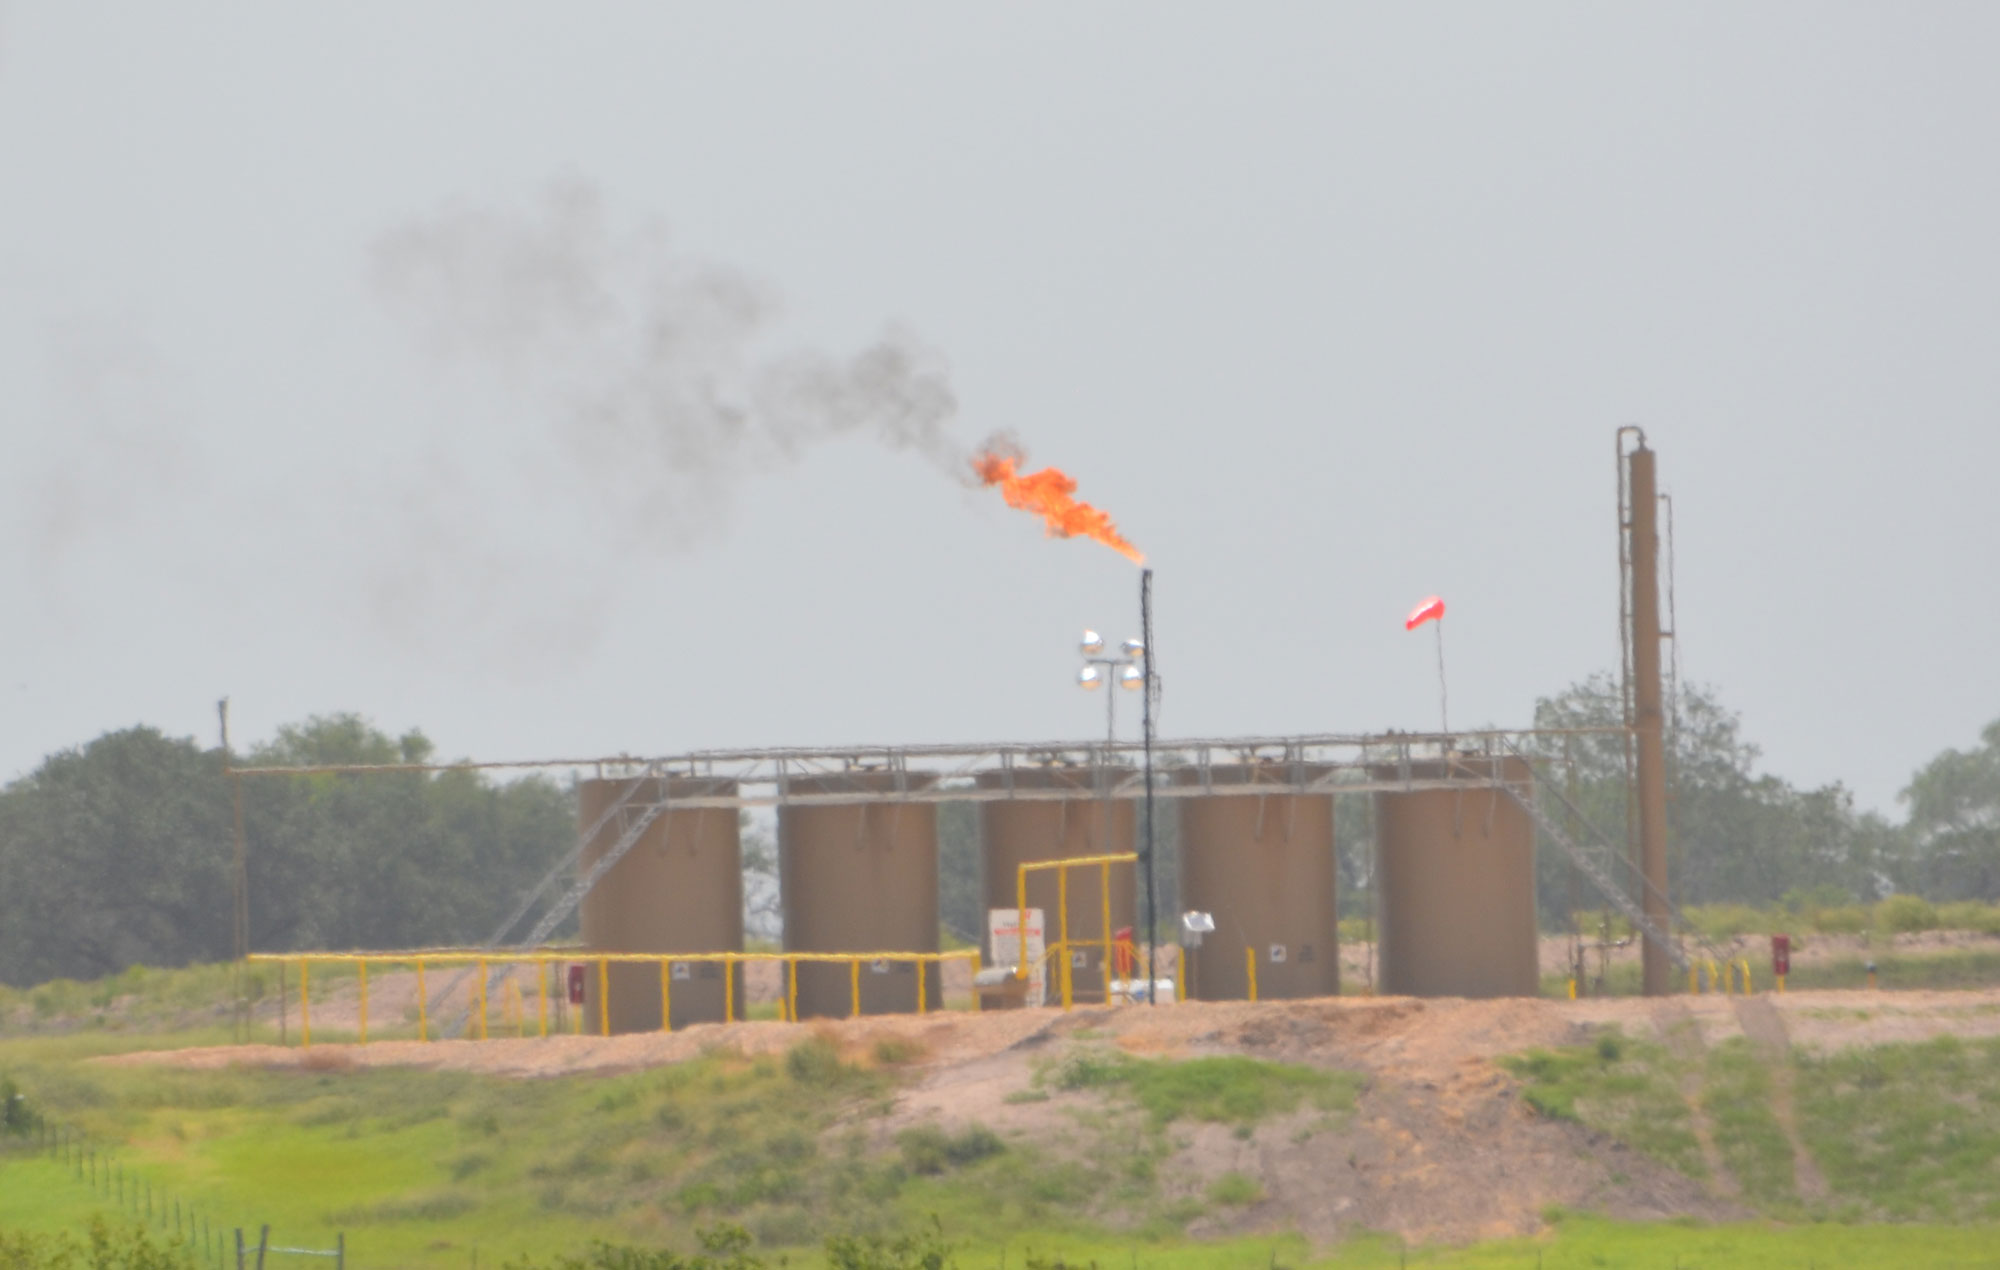 Photograph of gas flaring in the Eagle Ford Shale. The flare appears to be a tall pipe with a flame coming out of the top. Thin black smoke is produced by the flame.